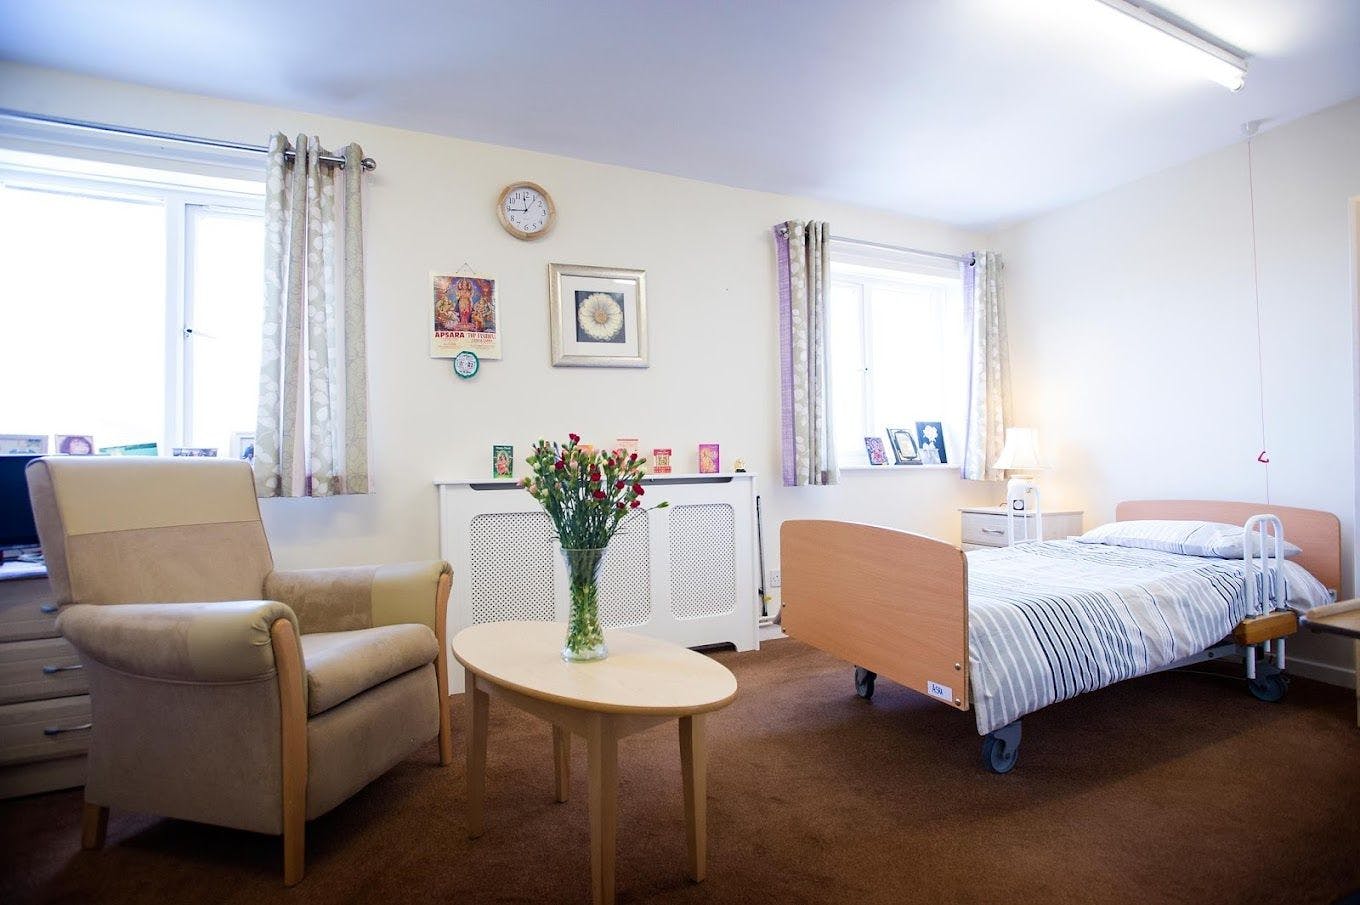 Bedroom at Asra house care home Leicester, Leicestershire